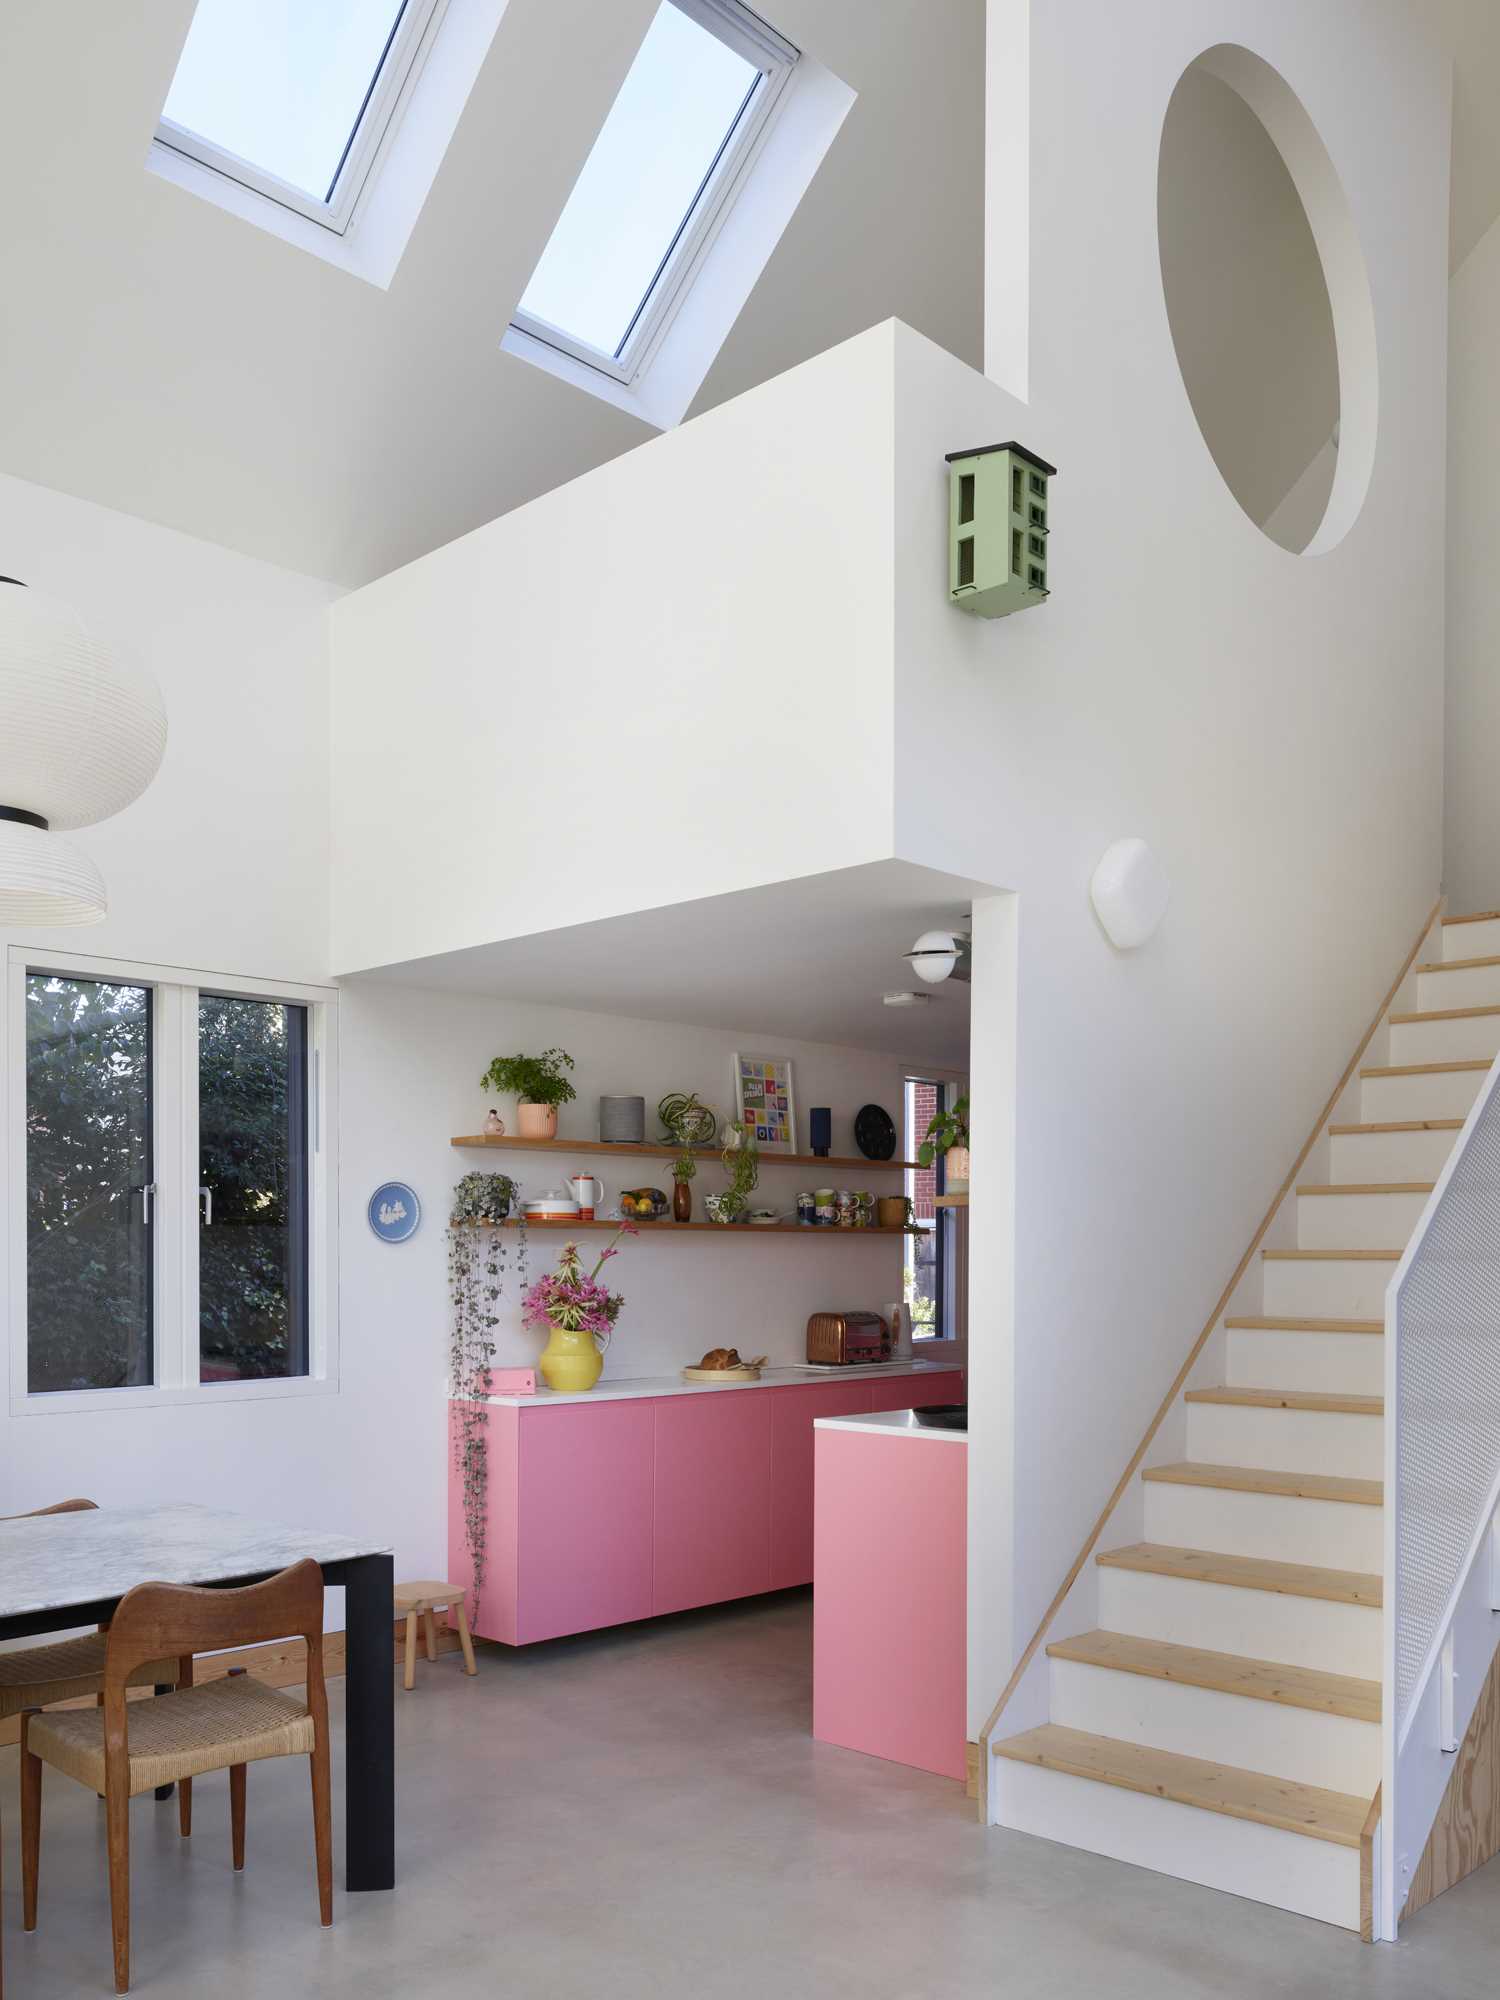 An unexpected design detail in this contemporary home is the kitchen with its pink cabinets, which are complemented by white countertops and floating wood shelves.